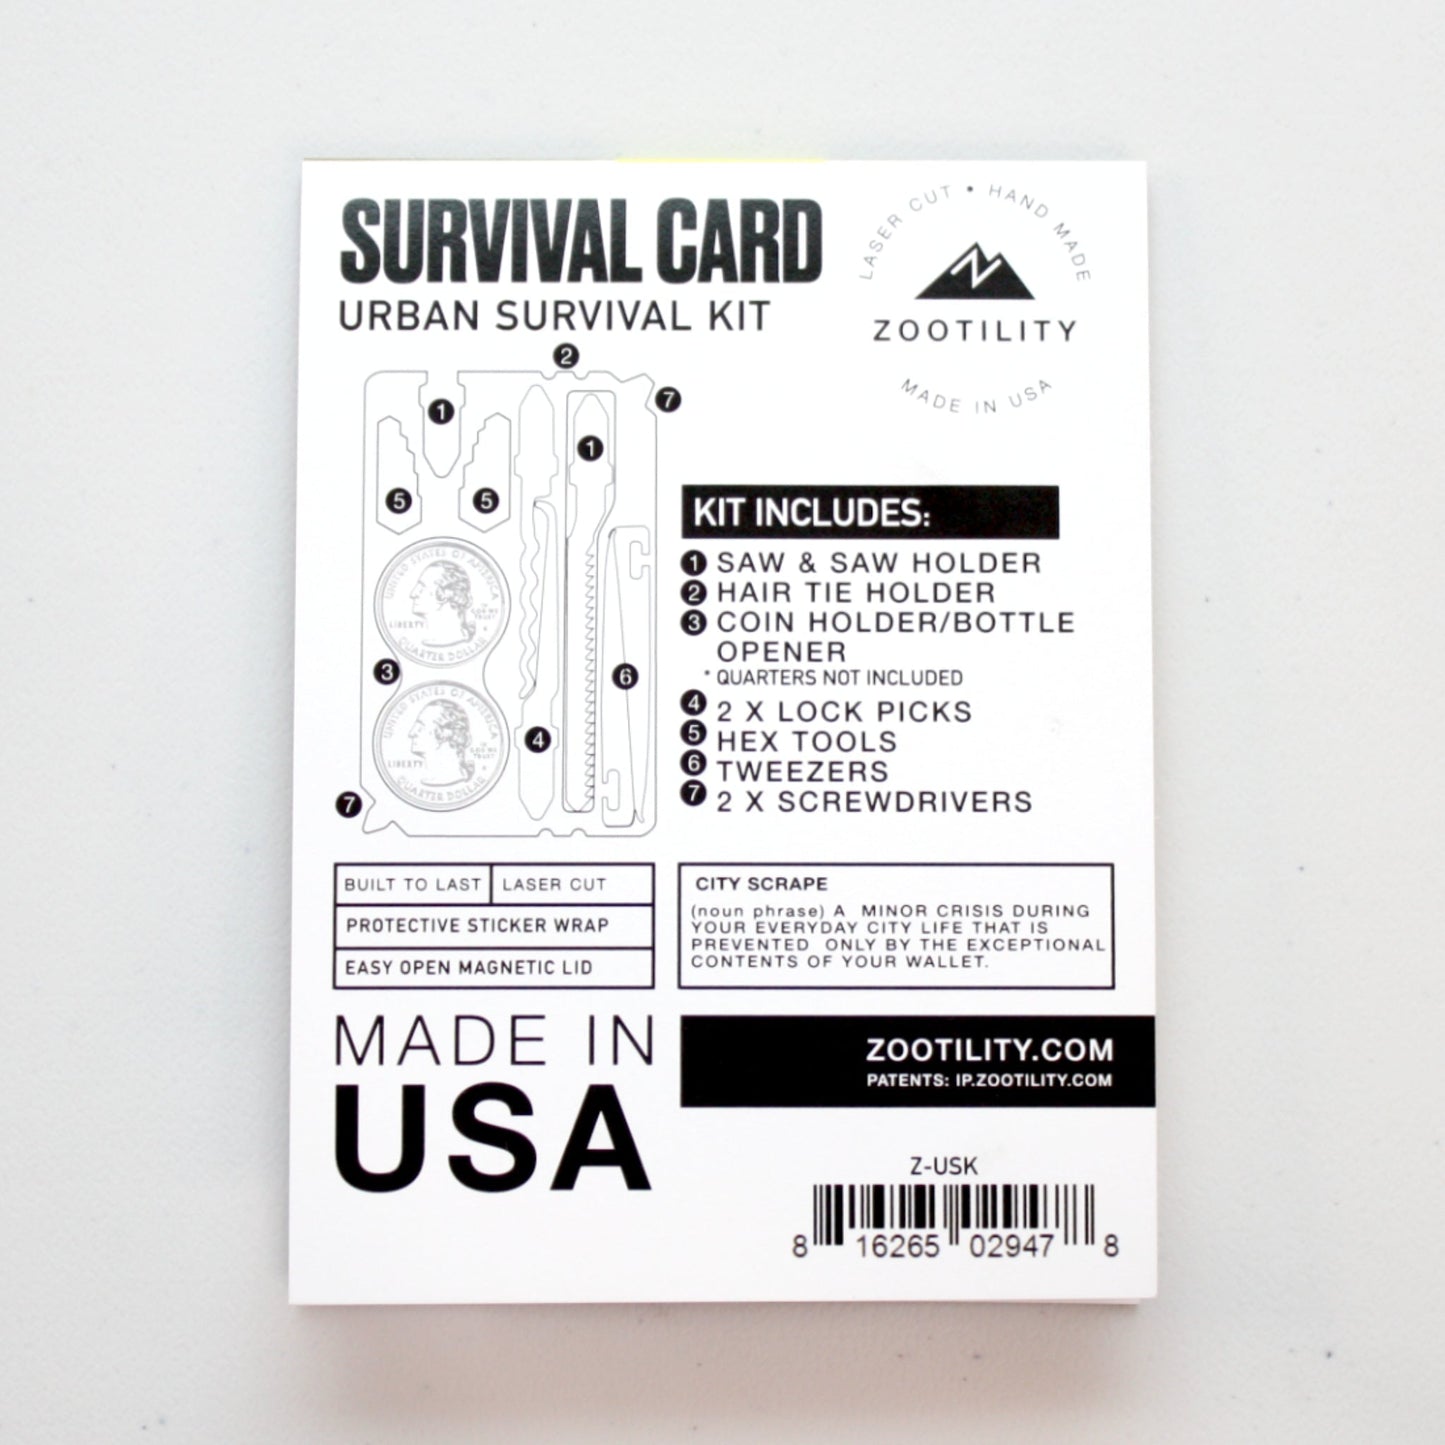 Pocket Urban Survival Kit - Made in the USA